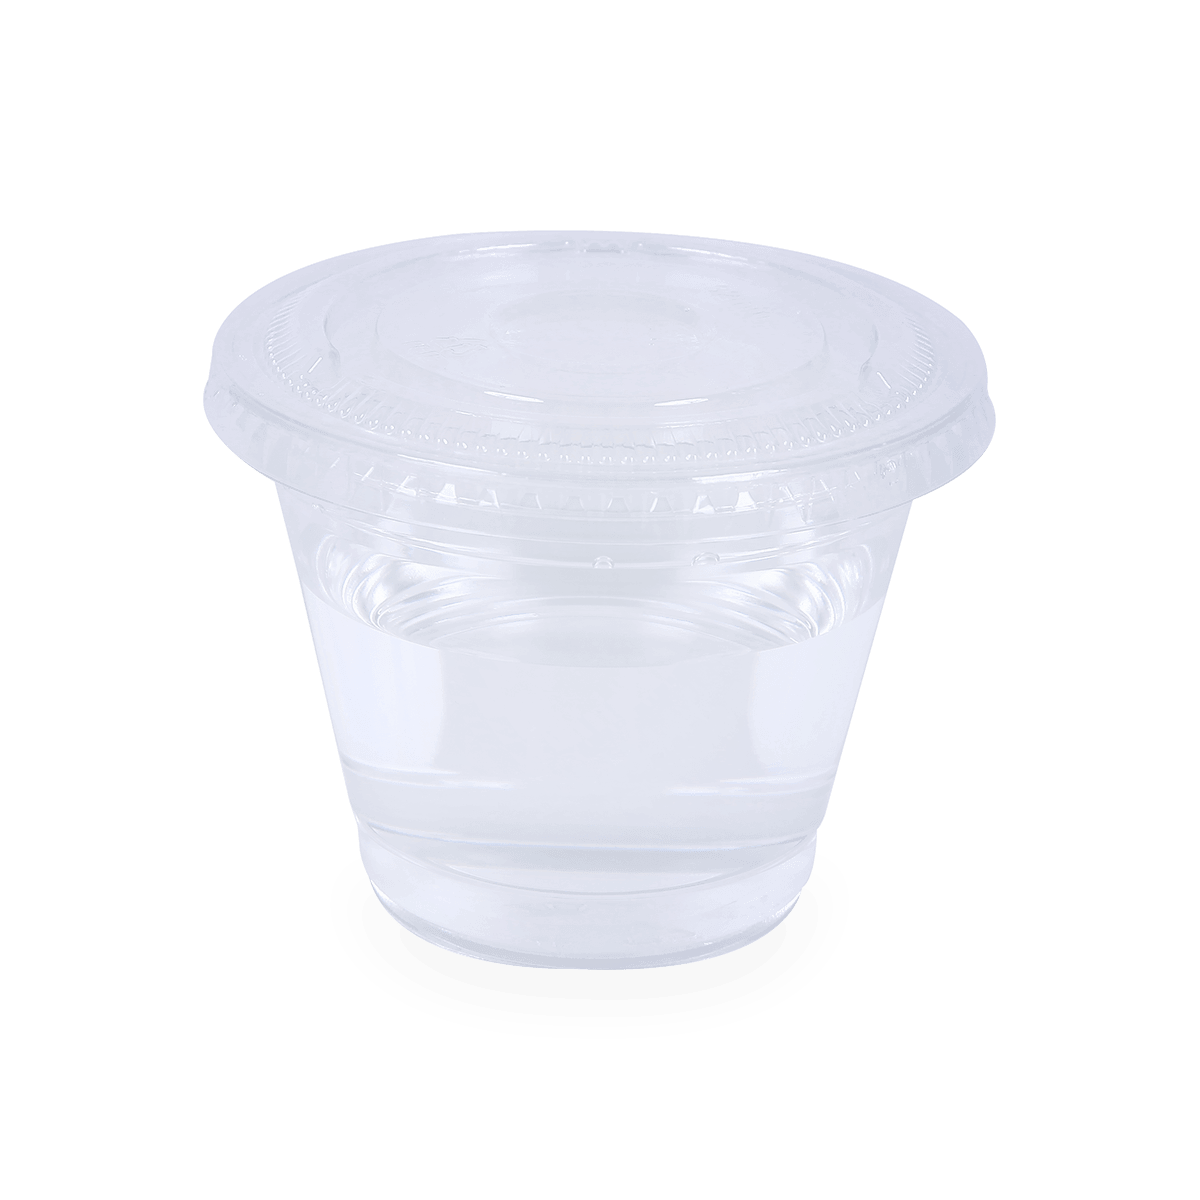 PP plastic cups and lids